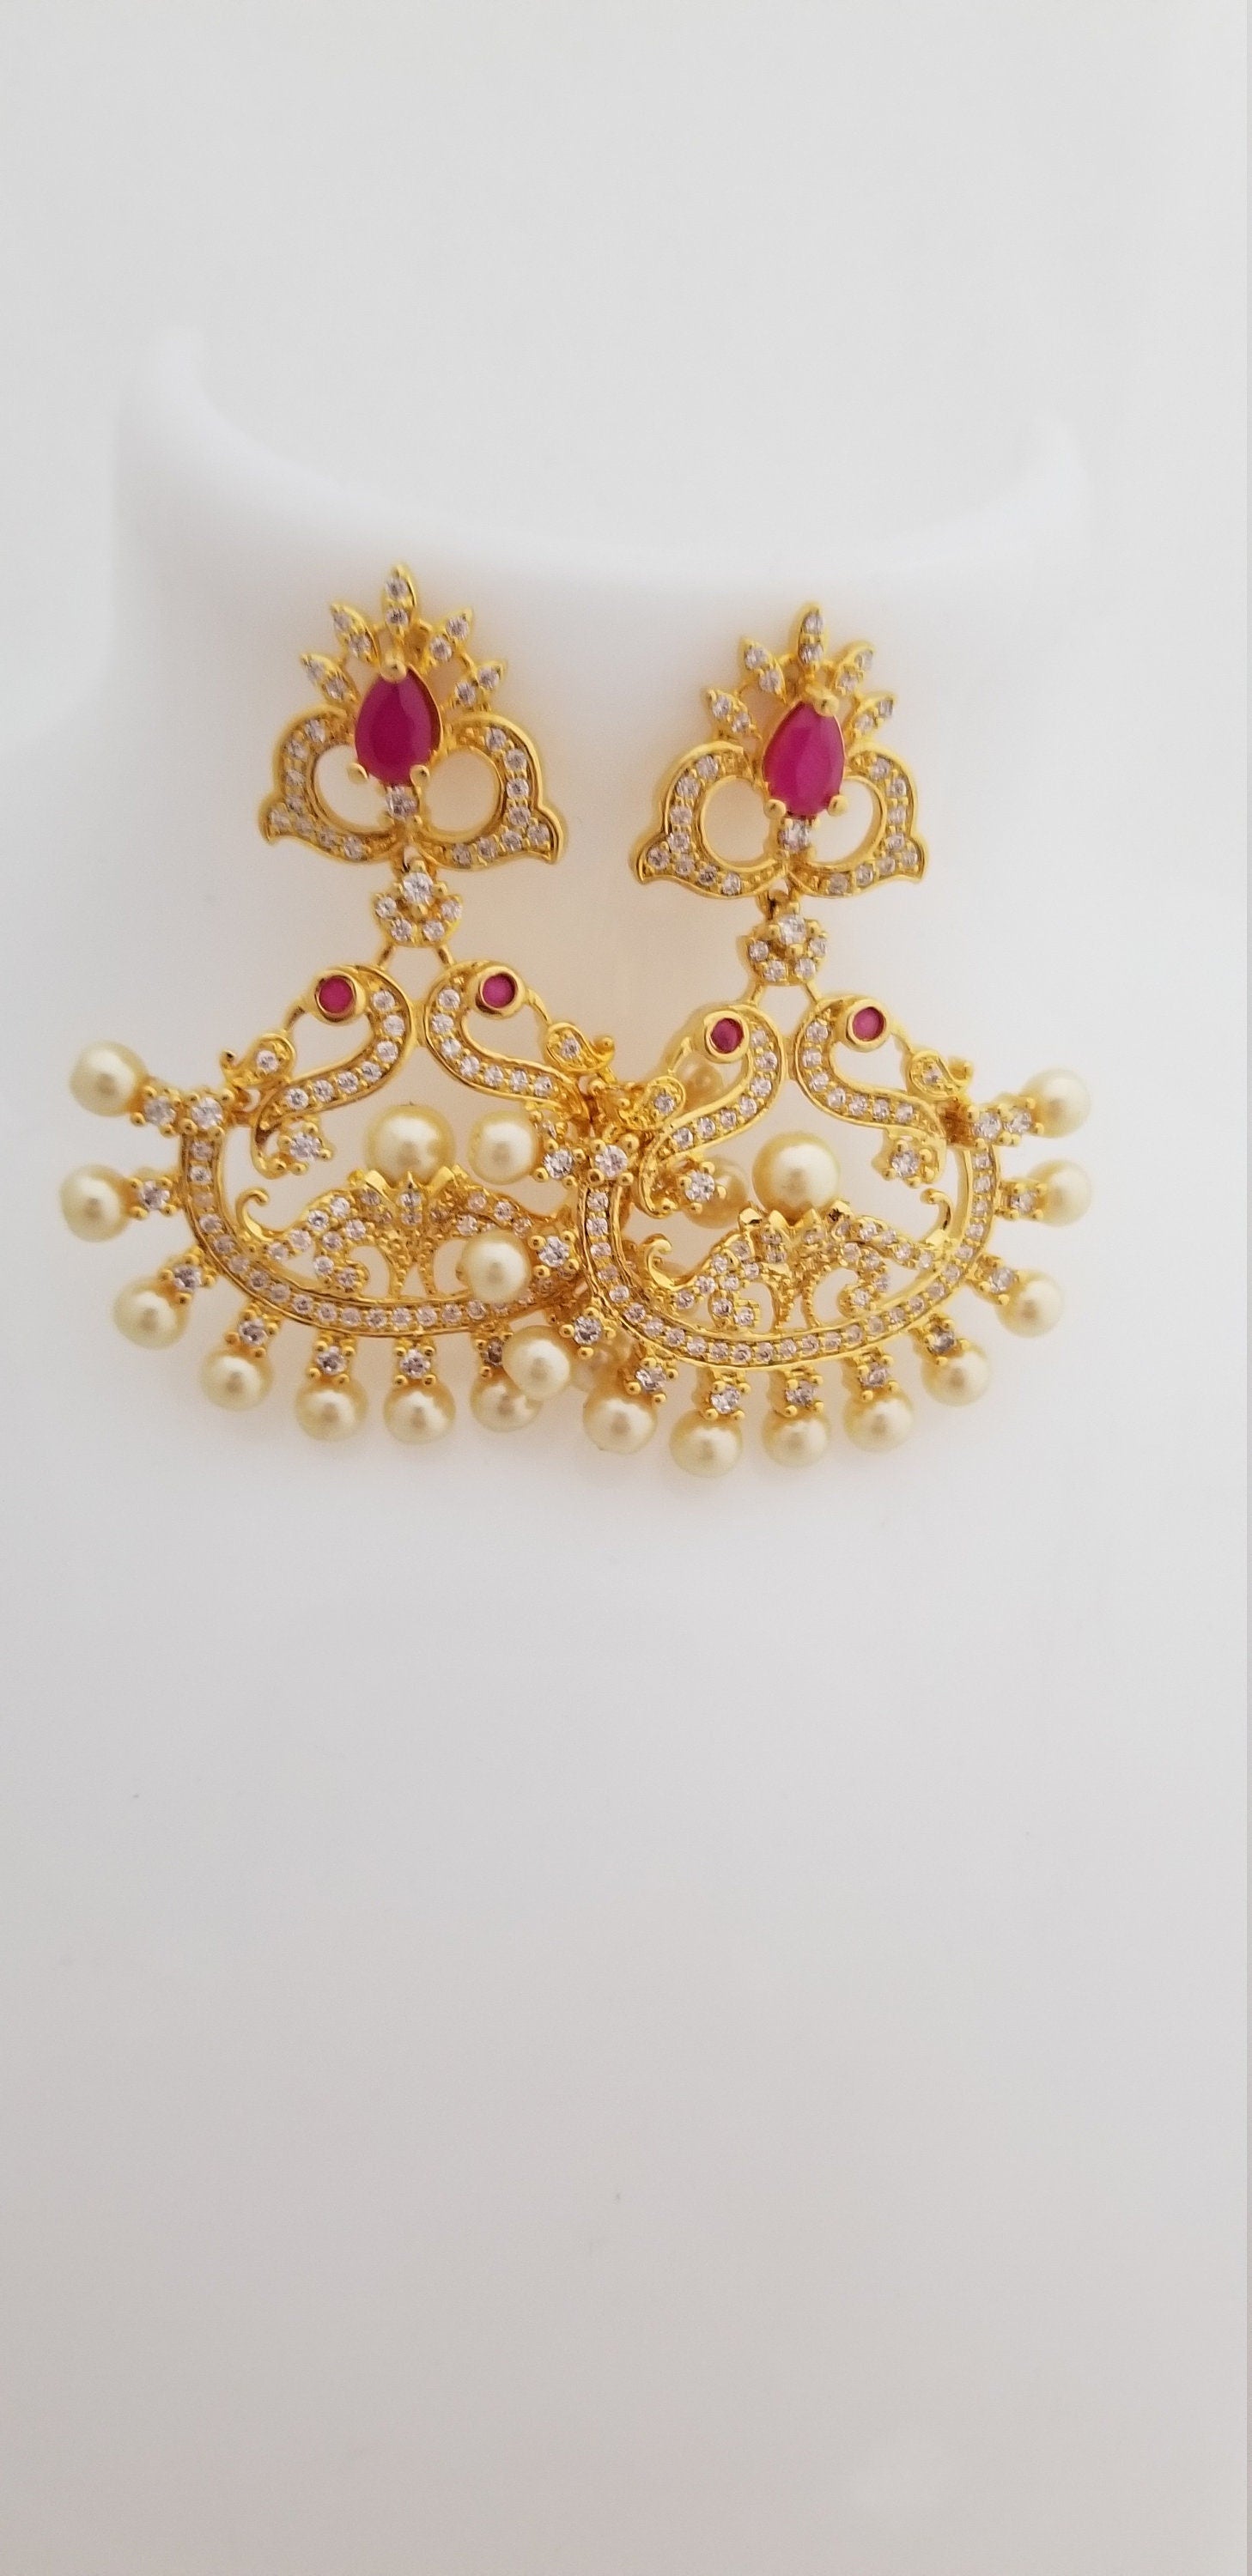 CZ stone Peacock Earrings with pearls Jhumki Jhumka Earrings for Women and Girls